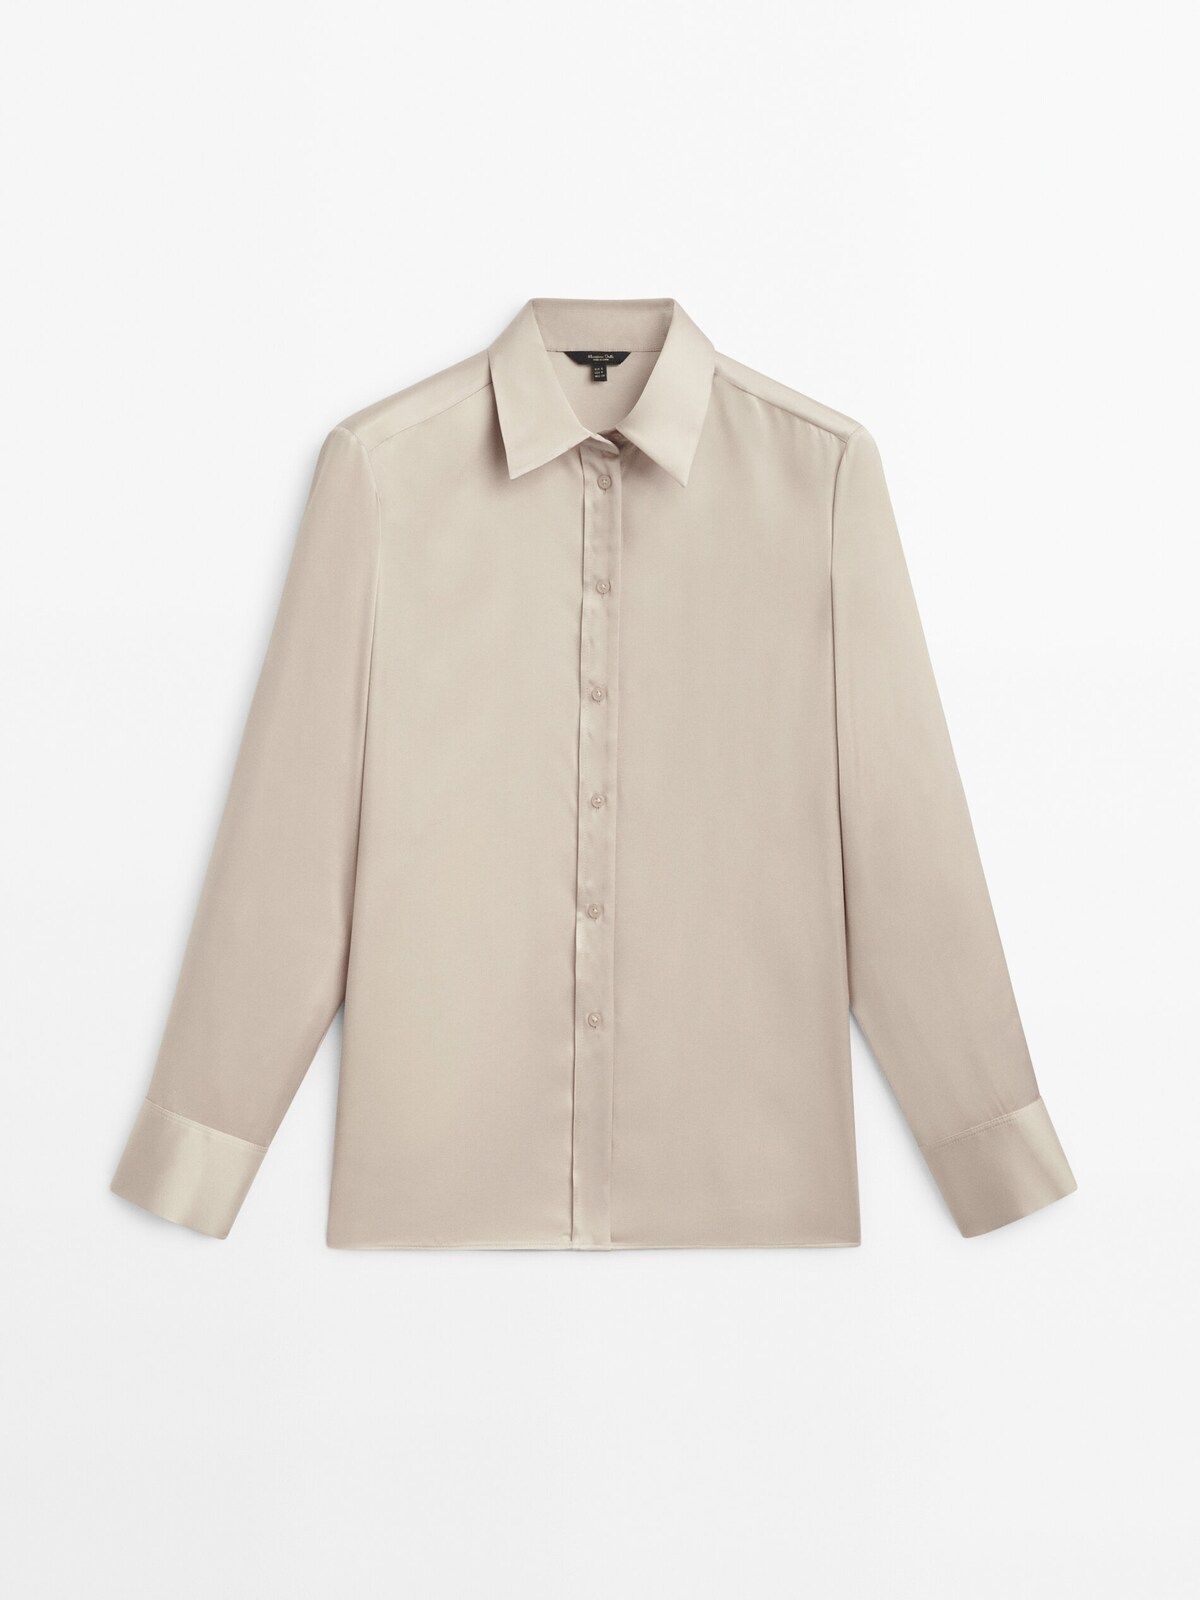 Satin shirt with cut-out details | Massimo Dutti (US)